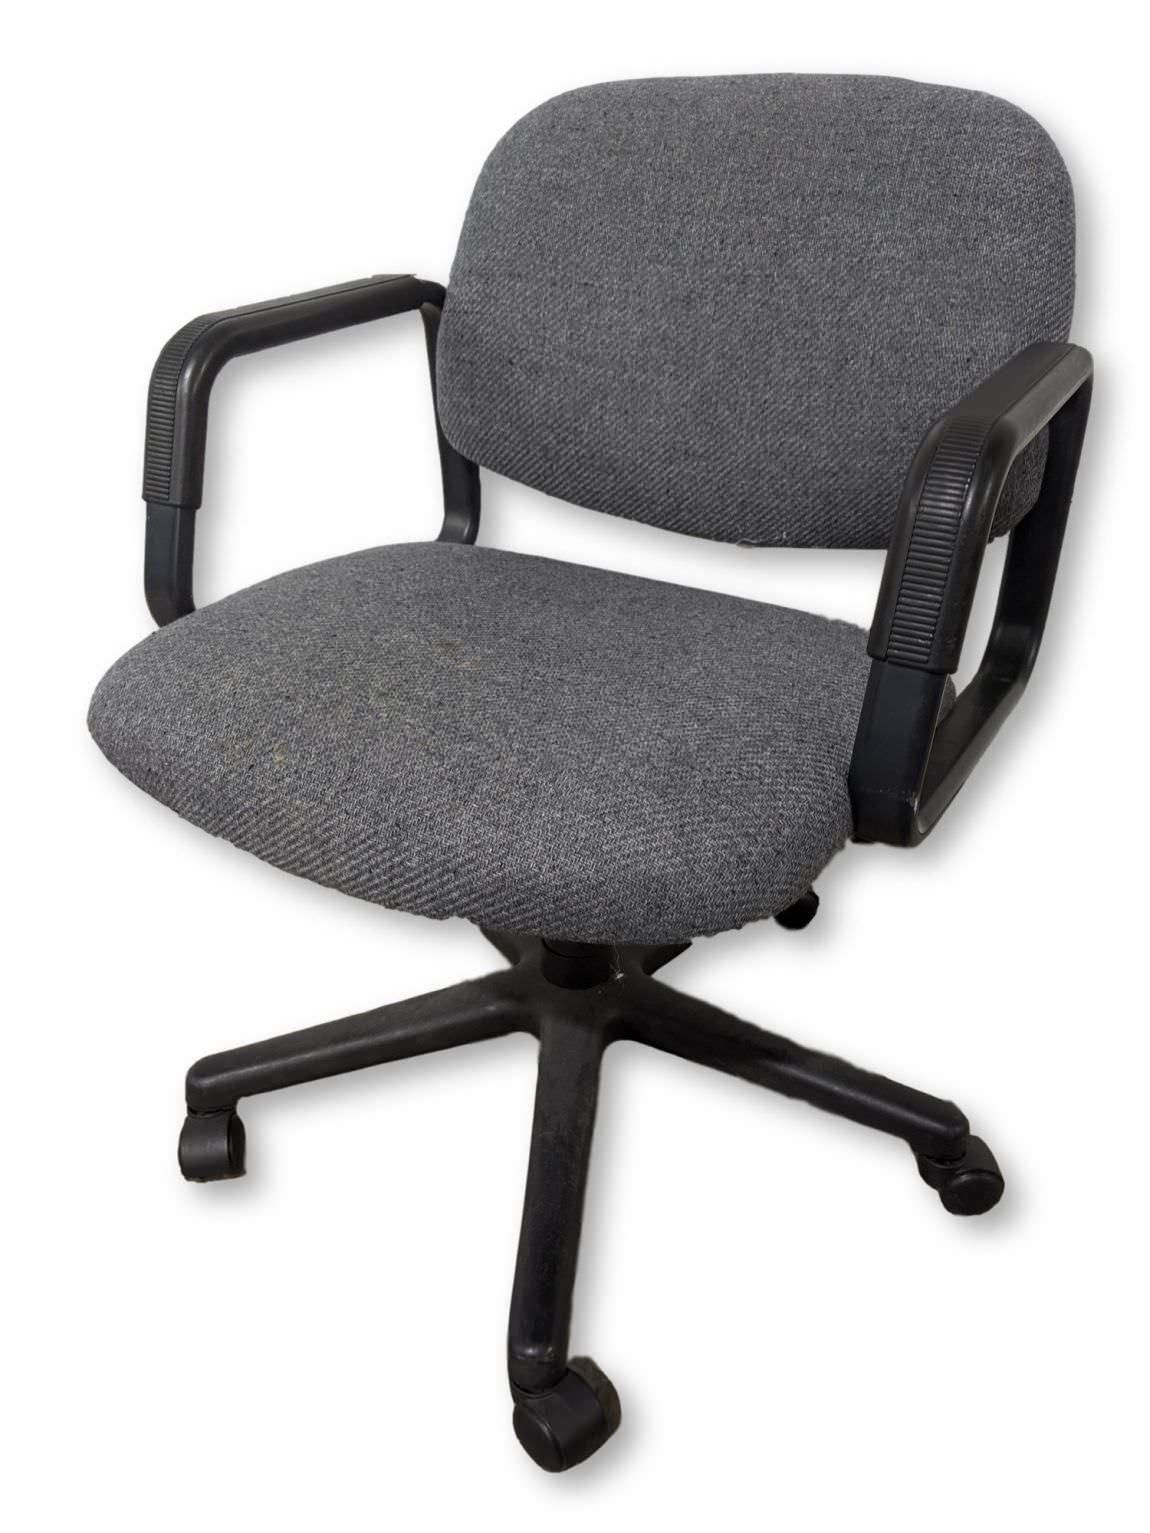 Gray Swivel Chair with Black Arms